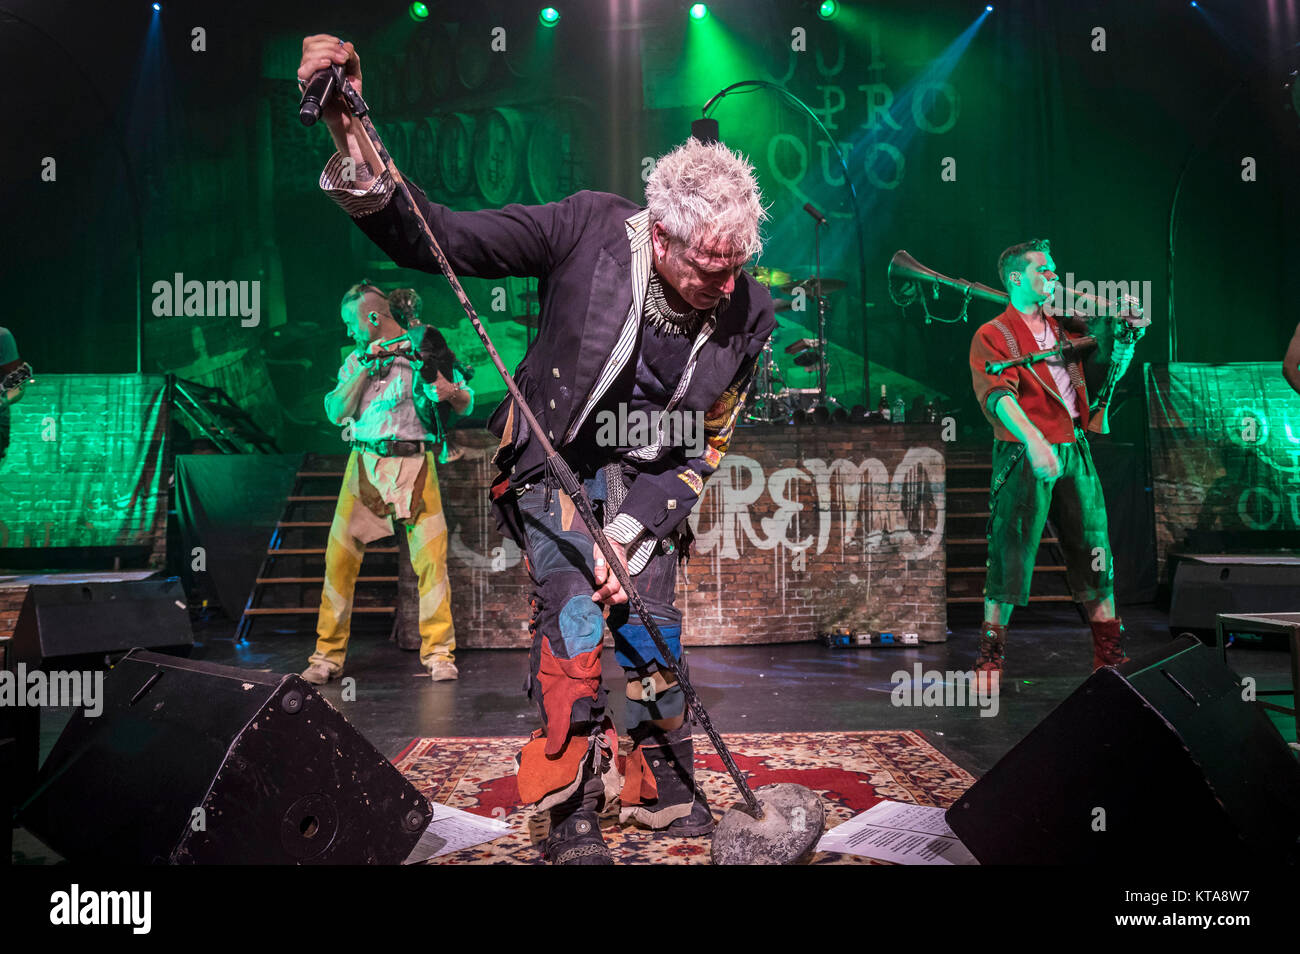 Boris Pfeiffer, Michael Robert Rhein and Flex der Biegsame of In Extremo perform live on stage at Osnabrück Halle on December 20, 2017 in Osnabrück, Germany. Stock Photo